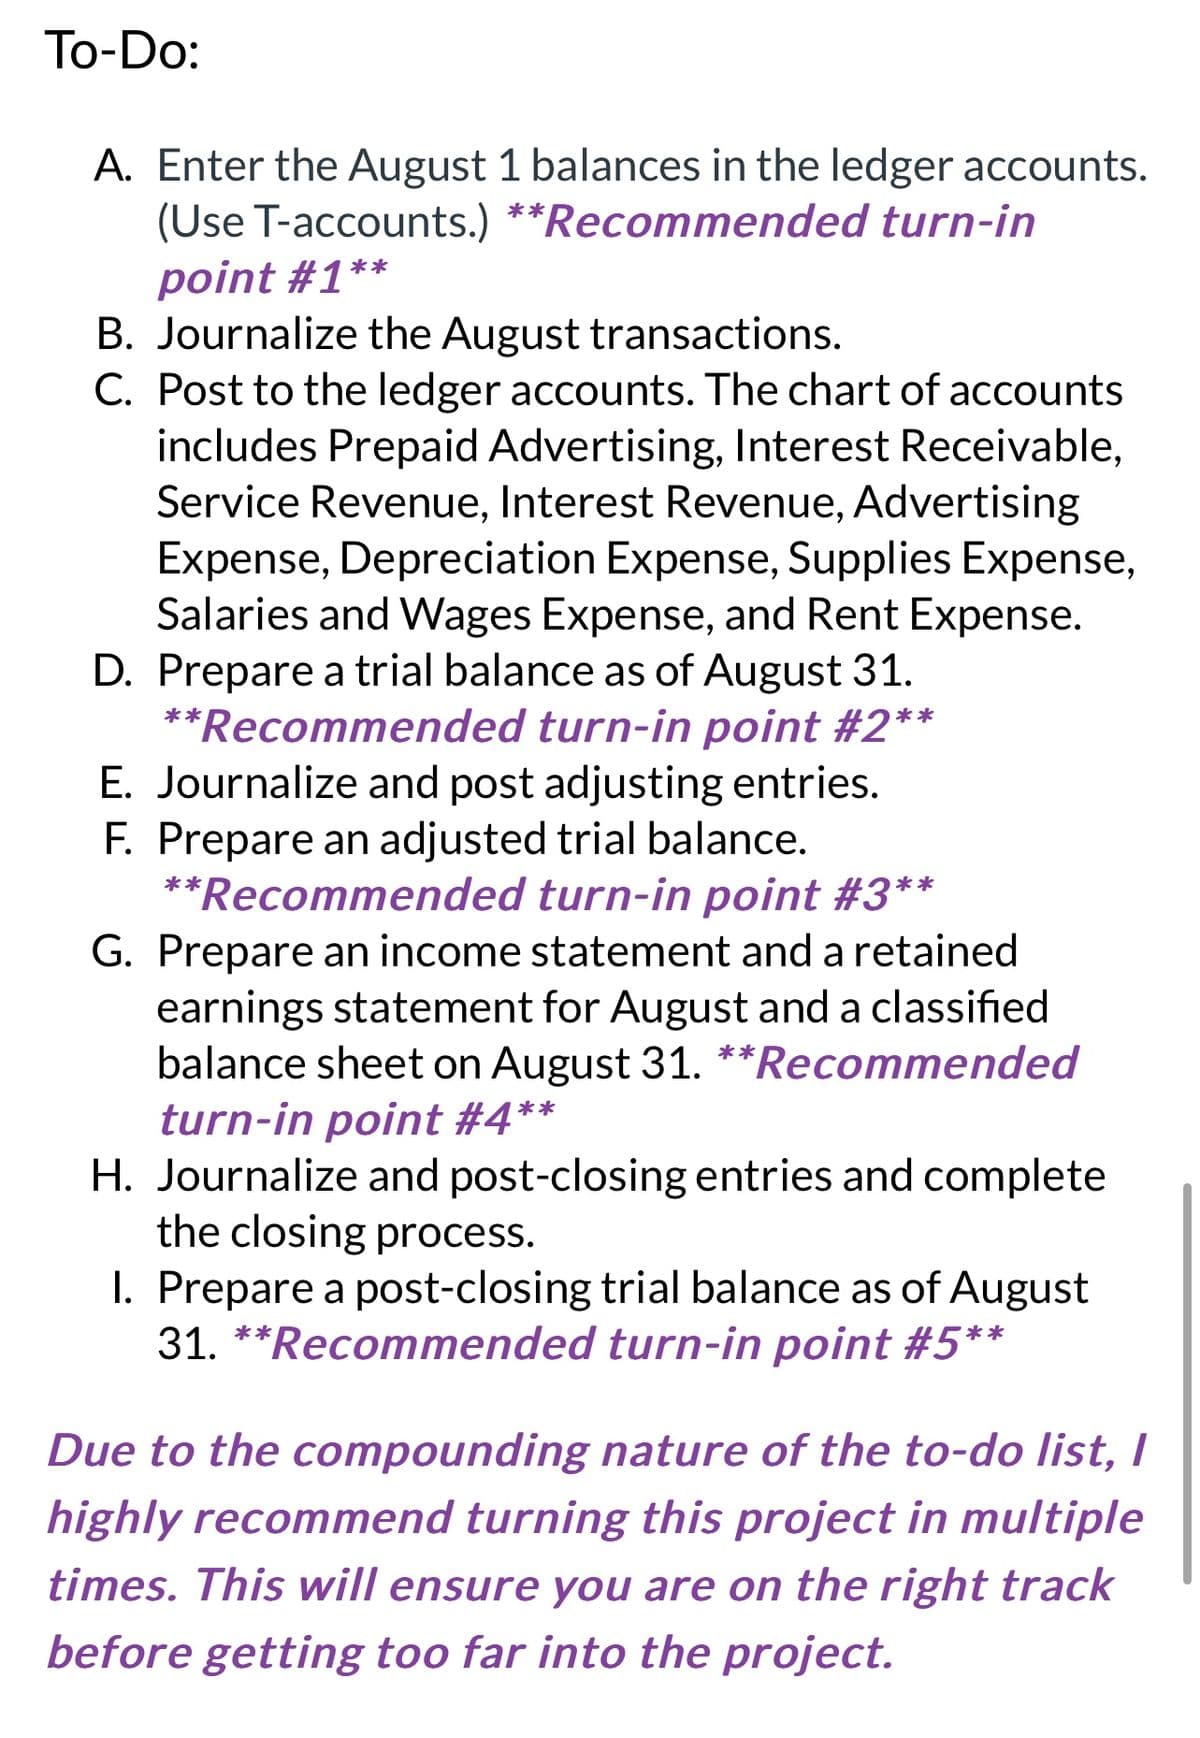 To-Do:
A. Enter the August 1 balances in the ledger accounts.
(Use T-accounts.) **Recommended turn-in
point #1**
B. Journalize the August transactions.
C. Post to the ledger accounts. The chart of accounts
includes Prepaid Advertising, Interest Receivable,
Service Revenue, Interest Revenue, Advertising
Expense, Depreciation Expense, Supplies Expense,
Salaries and Wages Expense, and Rent Expense.
D. Prepare a trial balance as of August 31.
**Recommended turn-in point #2**
E. Journalize and post adjusting entries.
F. Prepare an adjusted trial balance.
**Recommended turn-in point #3**
G. Prepare an income statement and a retained
earnings statement for August and a classified
balance sheet on August 31. **Recommended
turn-in point #4**
H. Journalize and post-closing entries and complete
the closing process.
I. Prepare a post-closing trial balance as of August
31. **Recommended turn-in point #5**
Due to the compounding nature of the to-do list, I
highly recommend turning this project in multiple
times. This will ensure you are on the right track
before getting too far into the project.